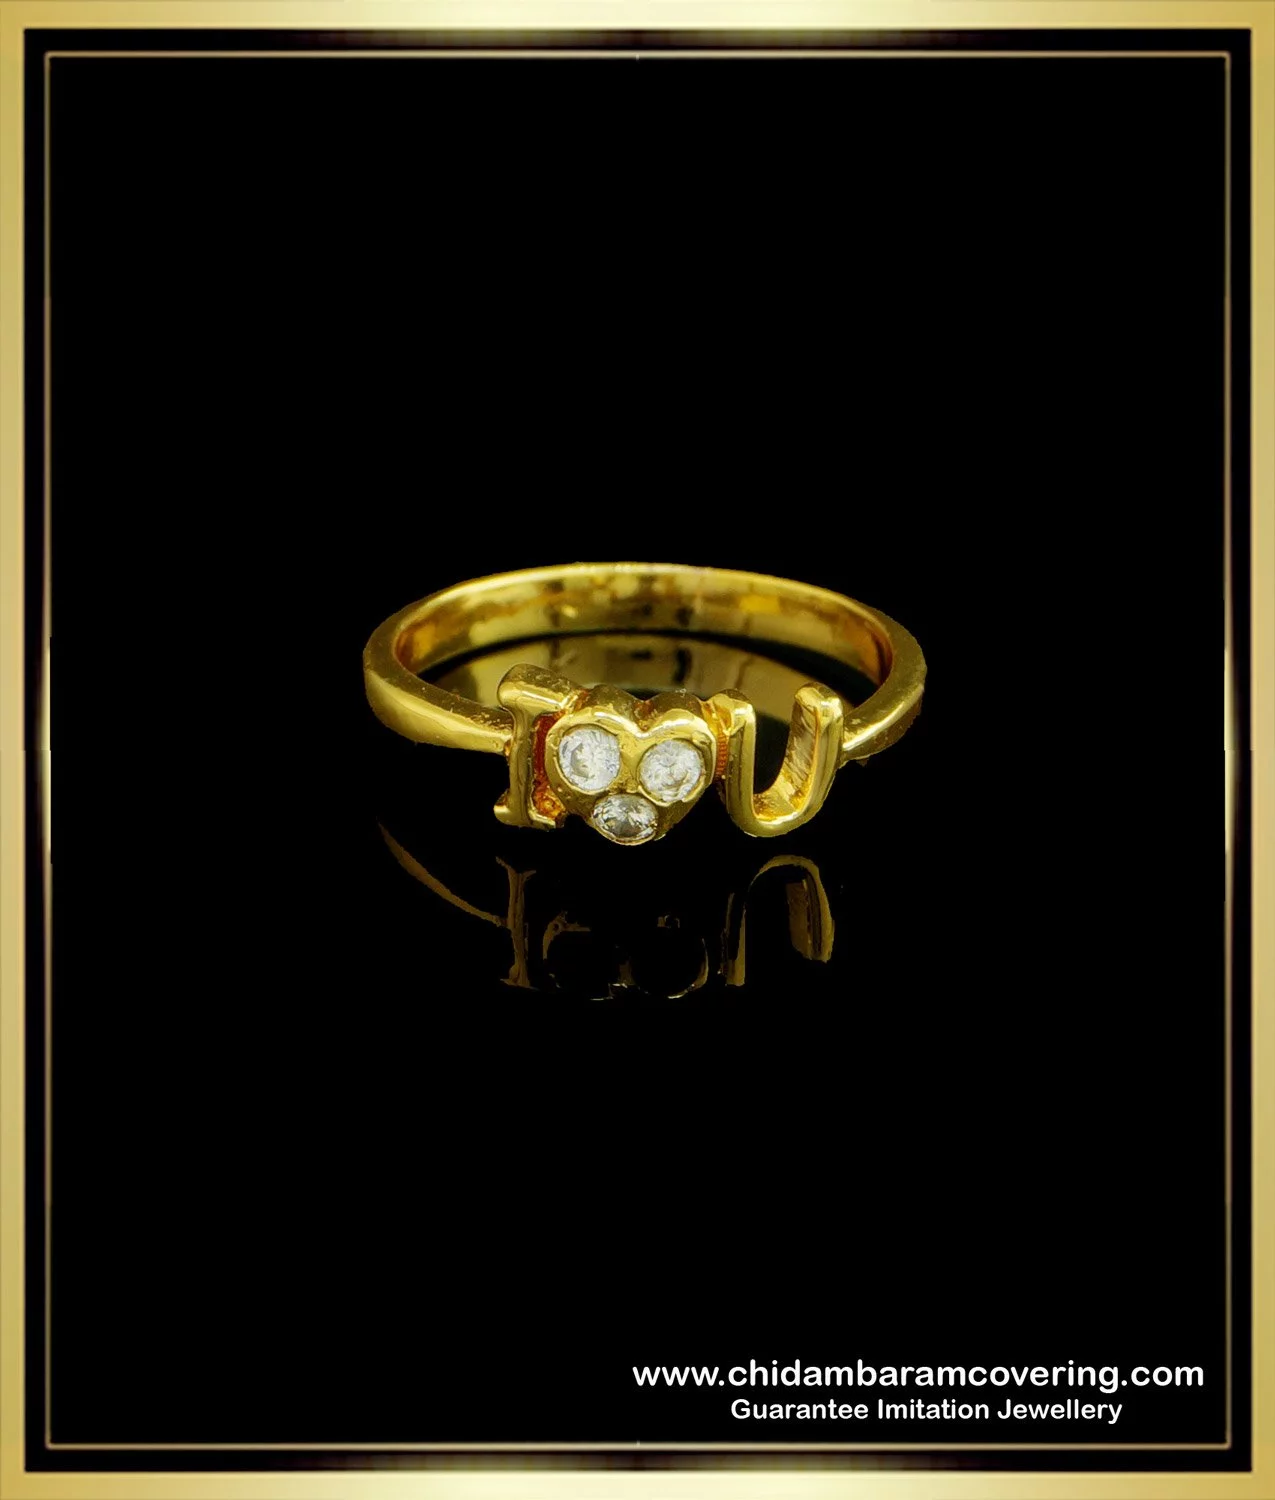 Latest Designs Of Gold Rings For Womens | gold Finger Ring Designs For  Ladies With Stones | T.F. | Gold ring designs, Ring designs, Gold finger  rings